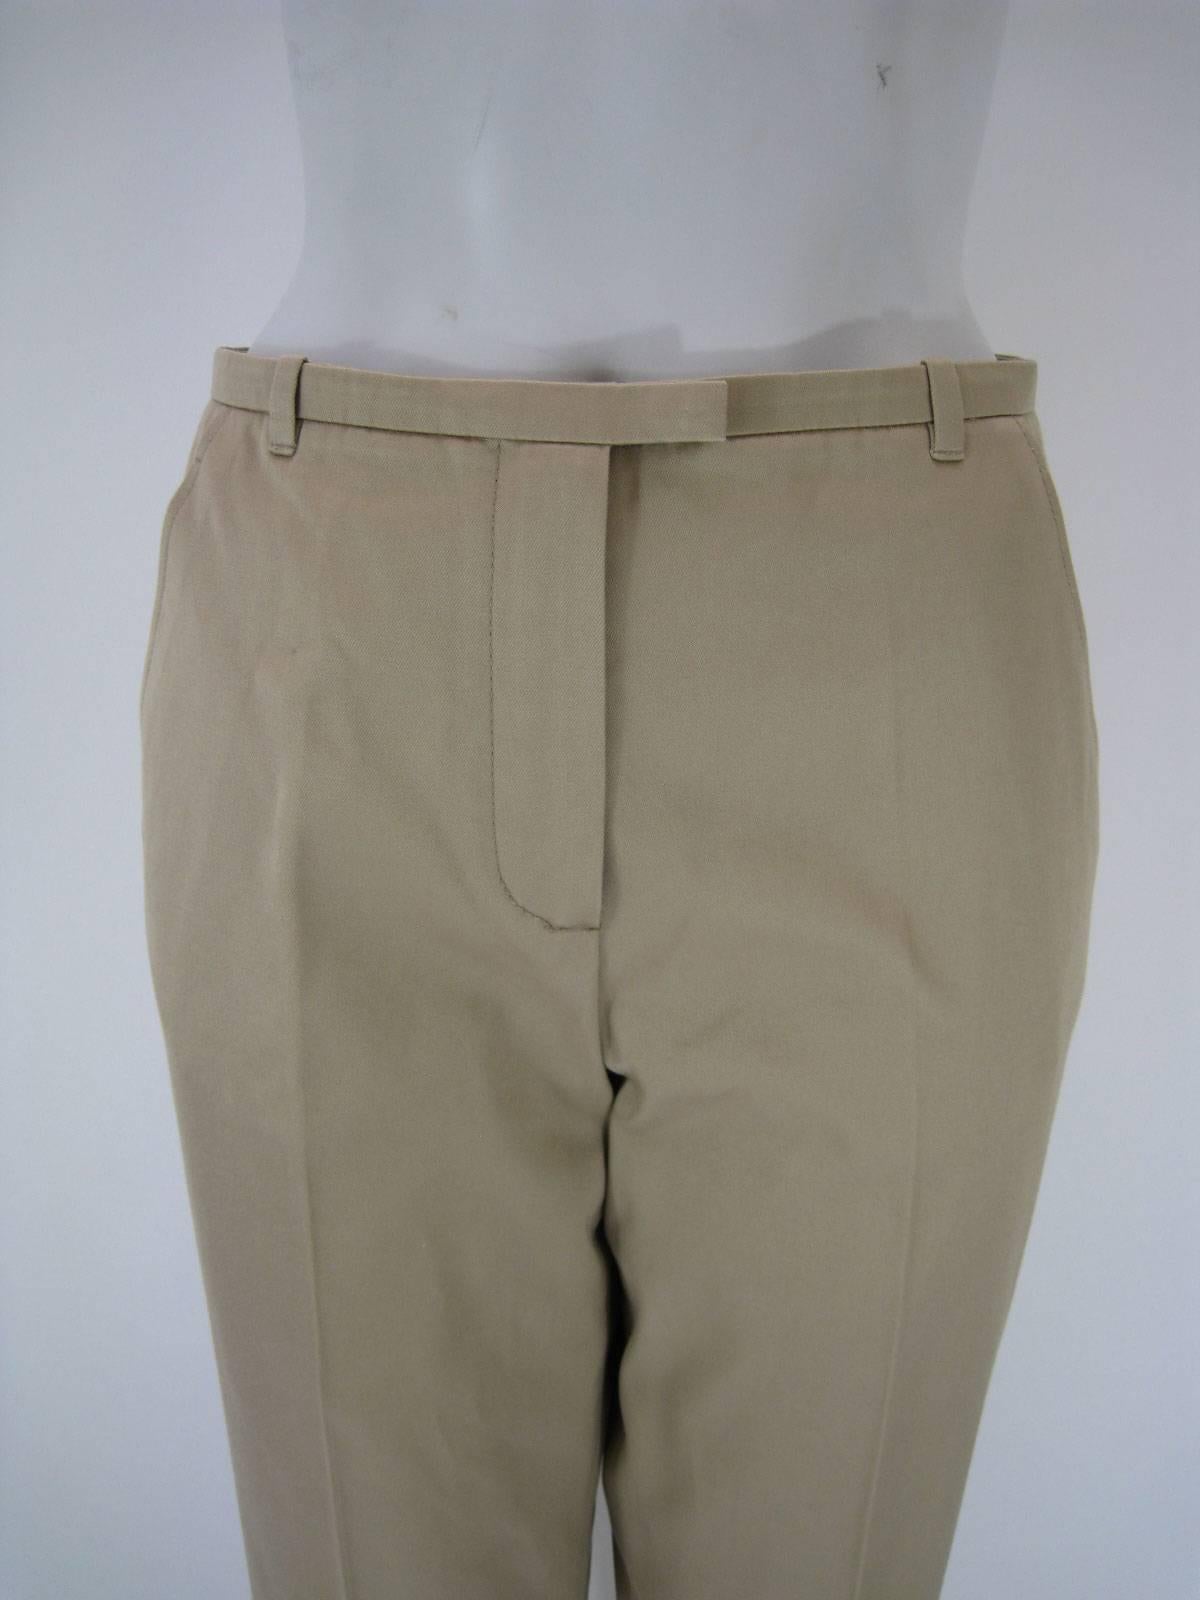 Classic Hermes khaki slacks.

Light tan color.

Straight legged.

Flat front.

Front zipper, button and hook closure.

Side pockets and one back pocket.

Belt hoops.

Tagged size 38.

Made in Italy.

This item is in good pre-owned condition. No rips